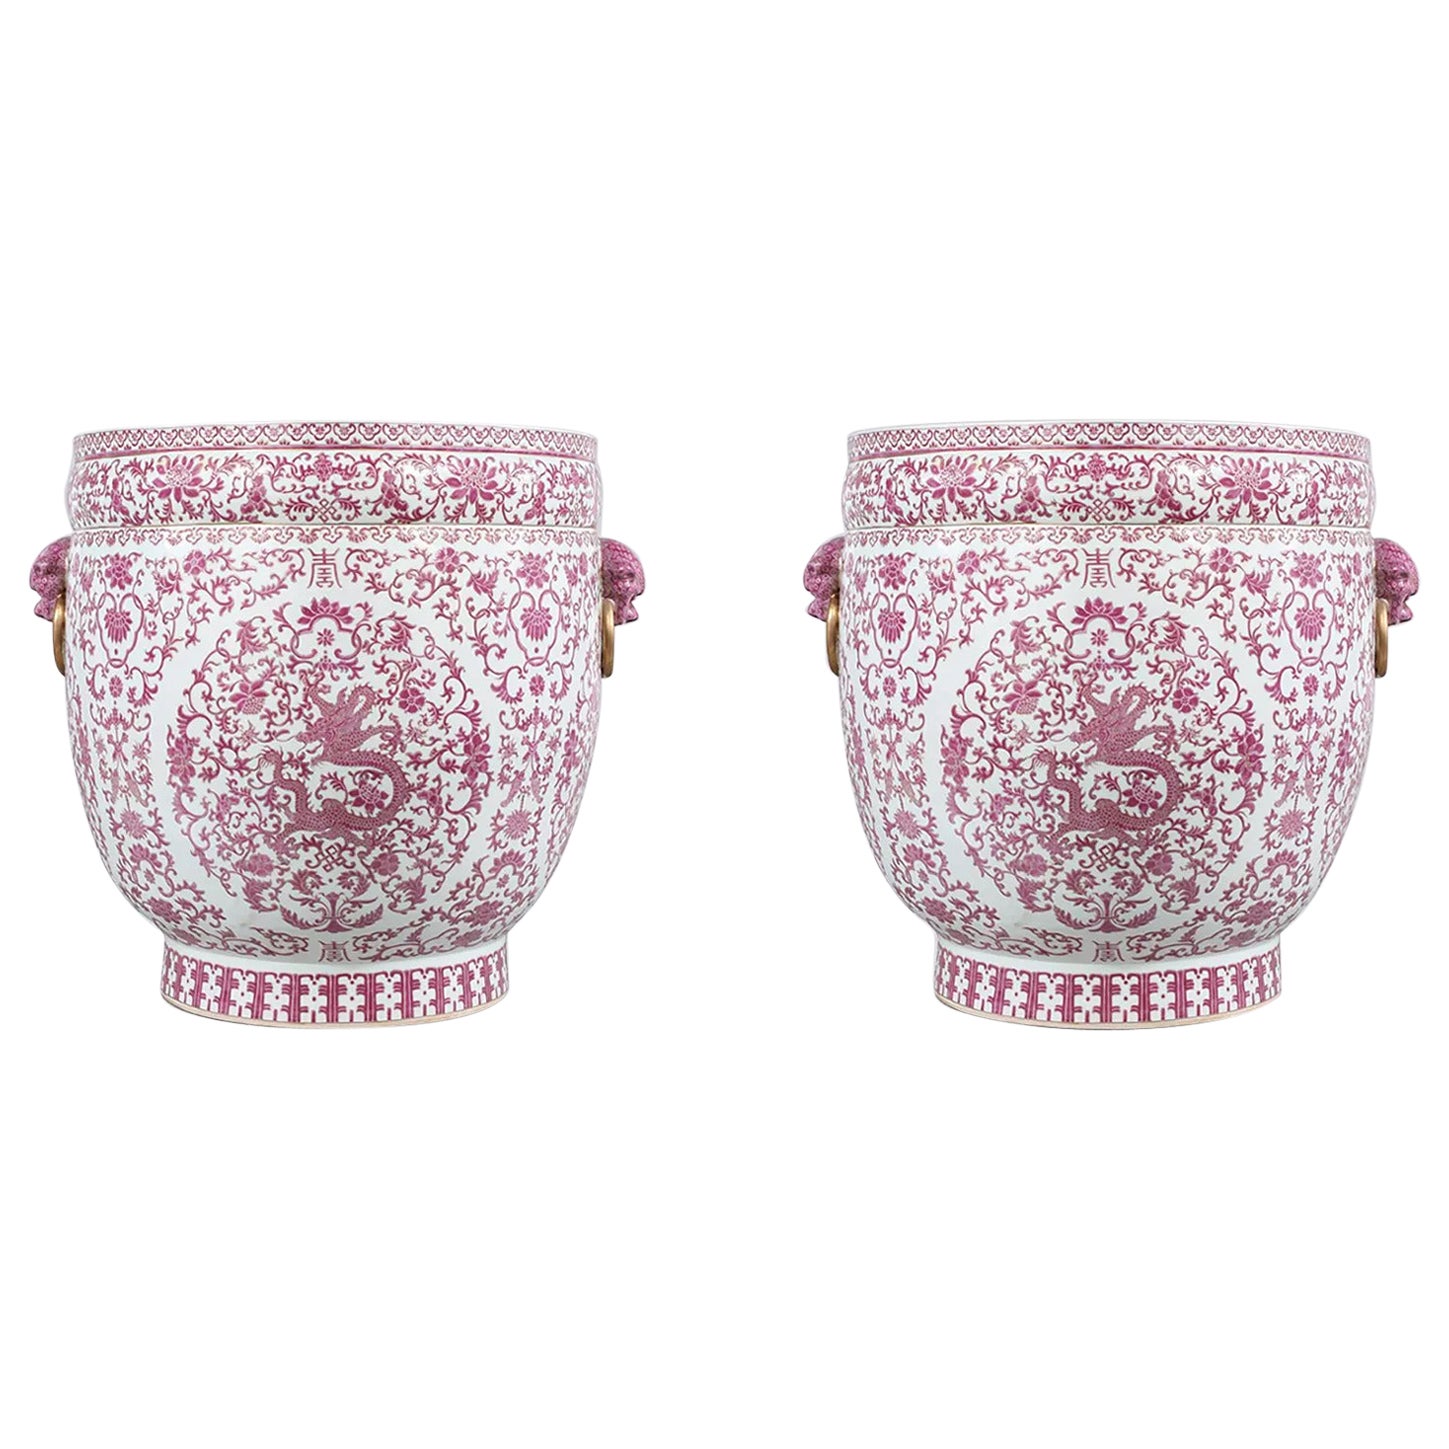 A Massive Pair of Chinese Pink and White Dragon Porcelain Planters, Republic For Sale